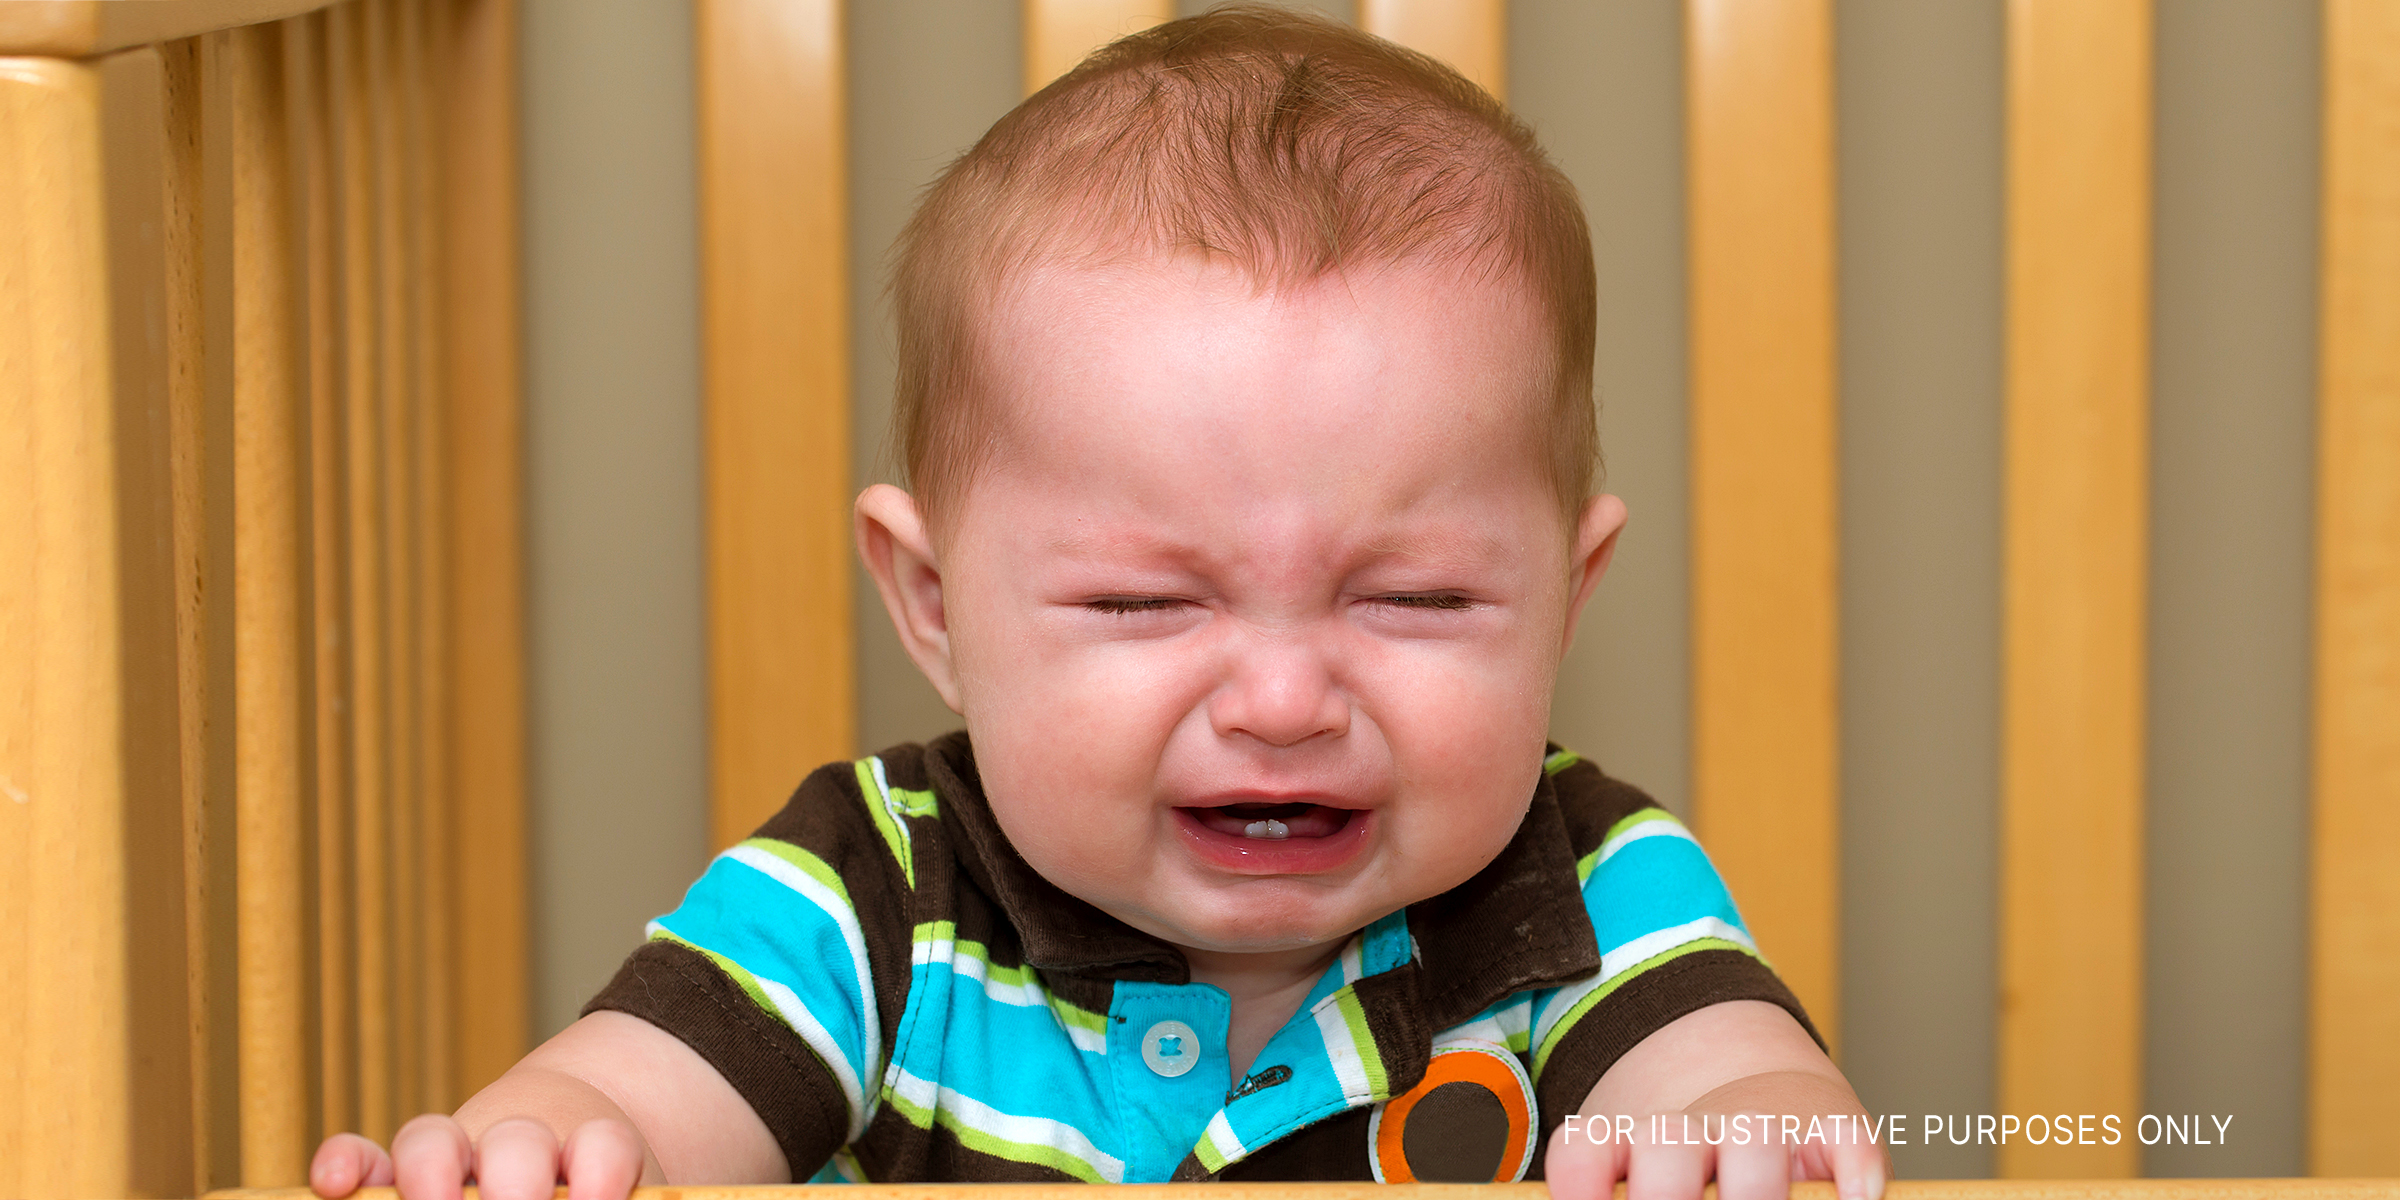 Baby boy crying | Source: Shutterstock